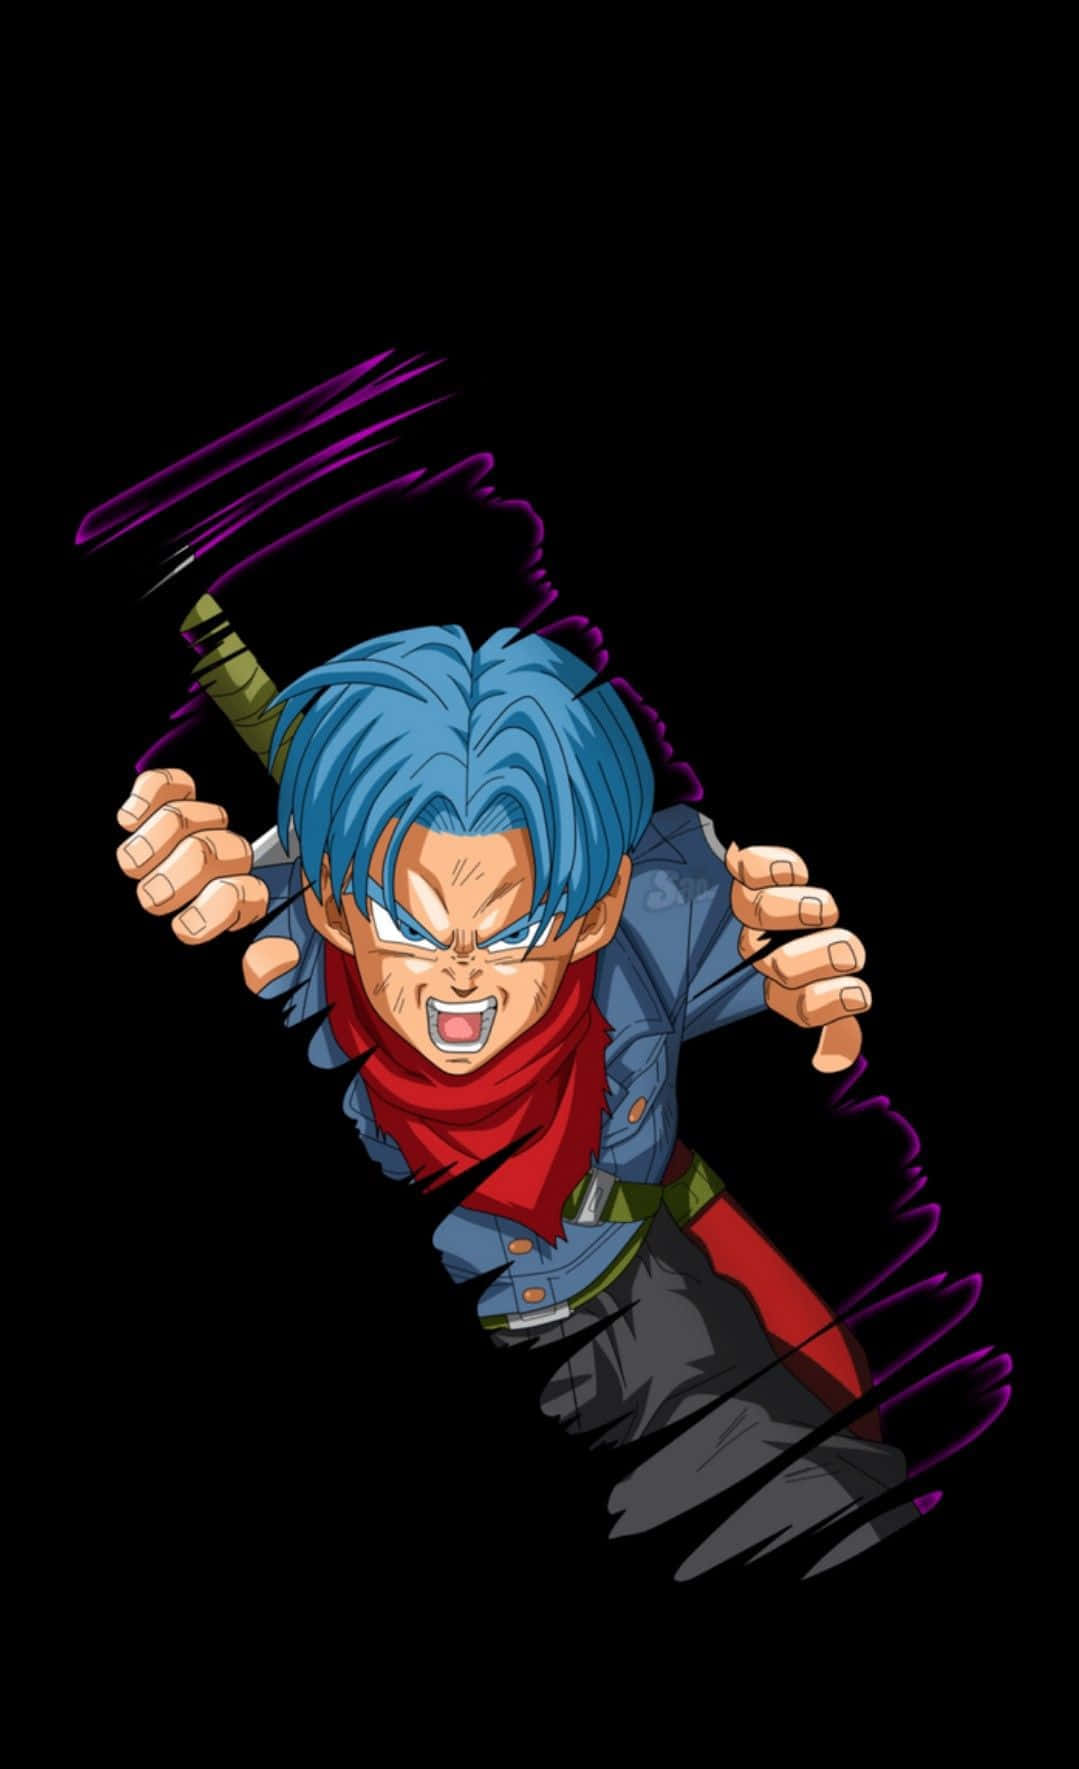 Download Get an Out of This World Experience with Dragon Ball Z Trunks  Wallpaper | Wallpapers.com